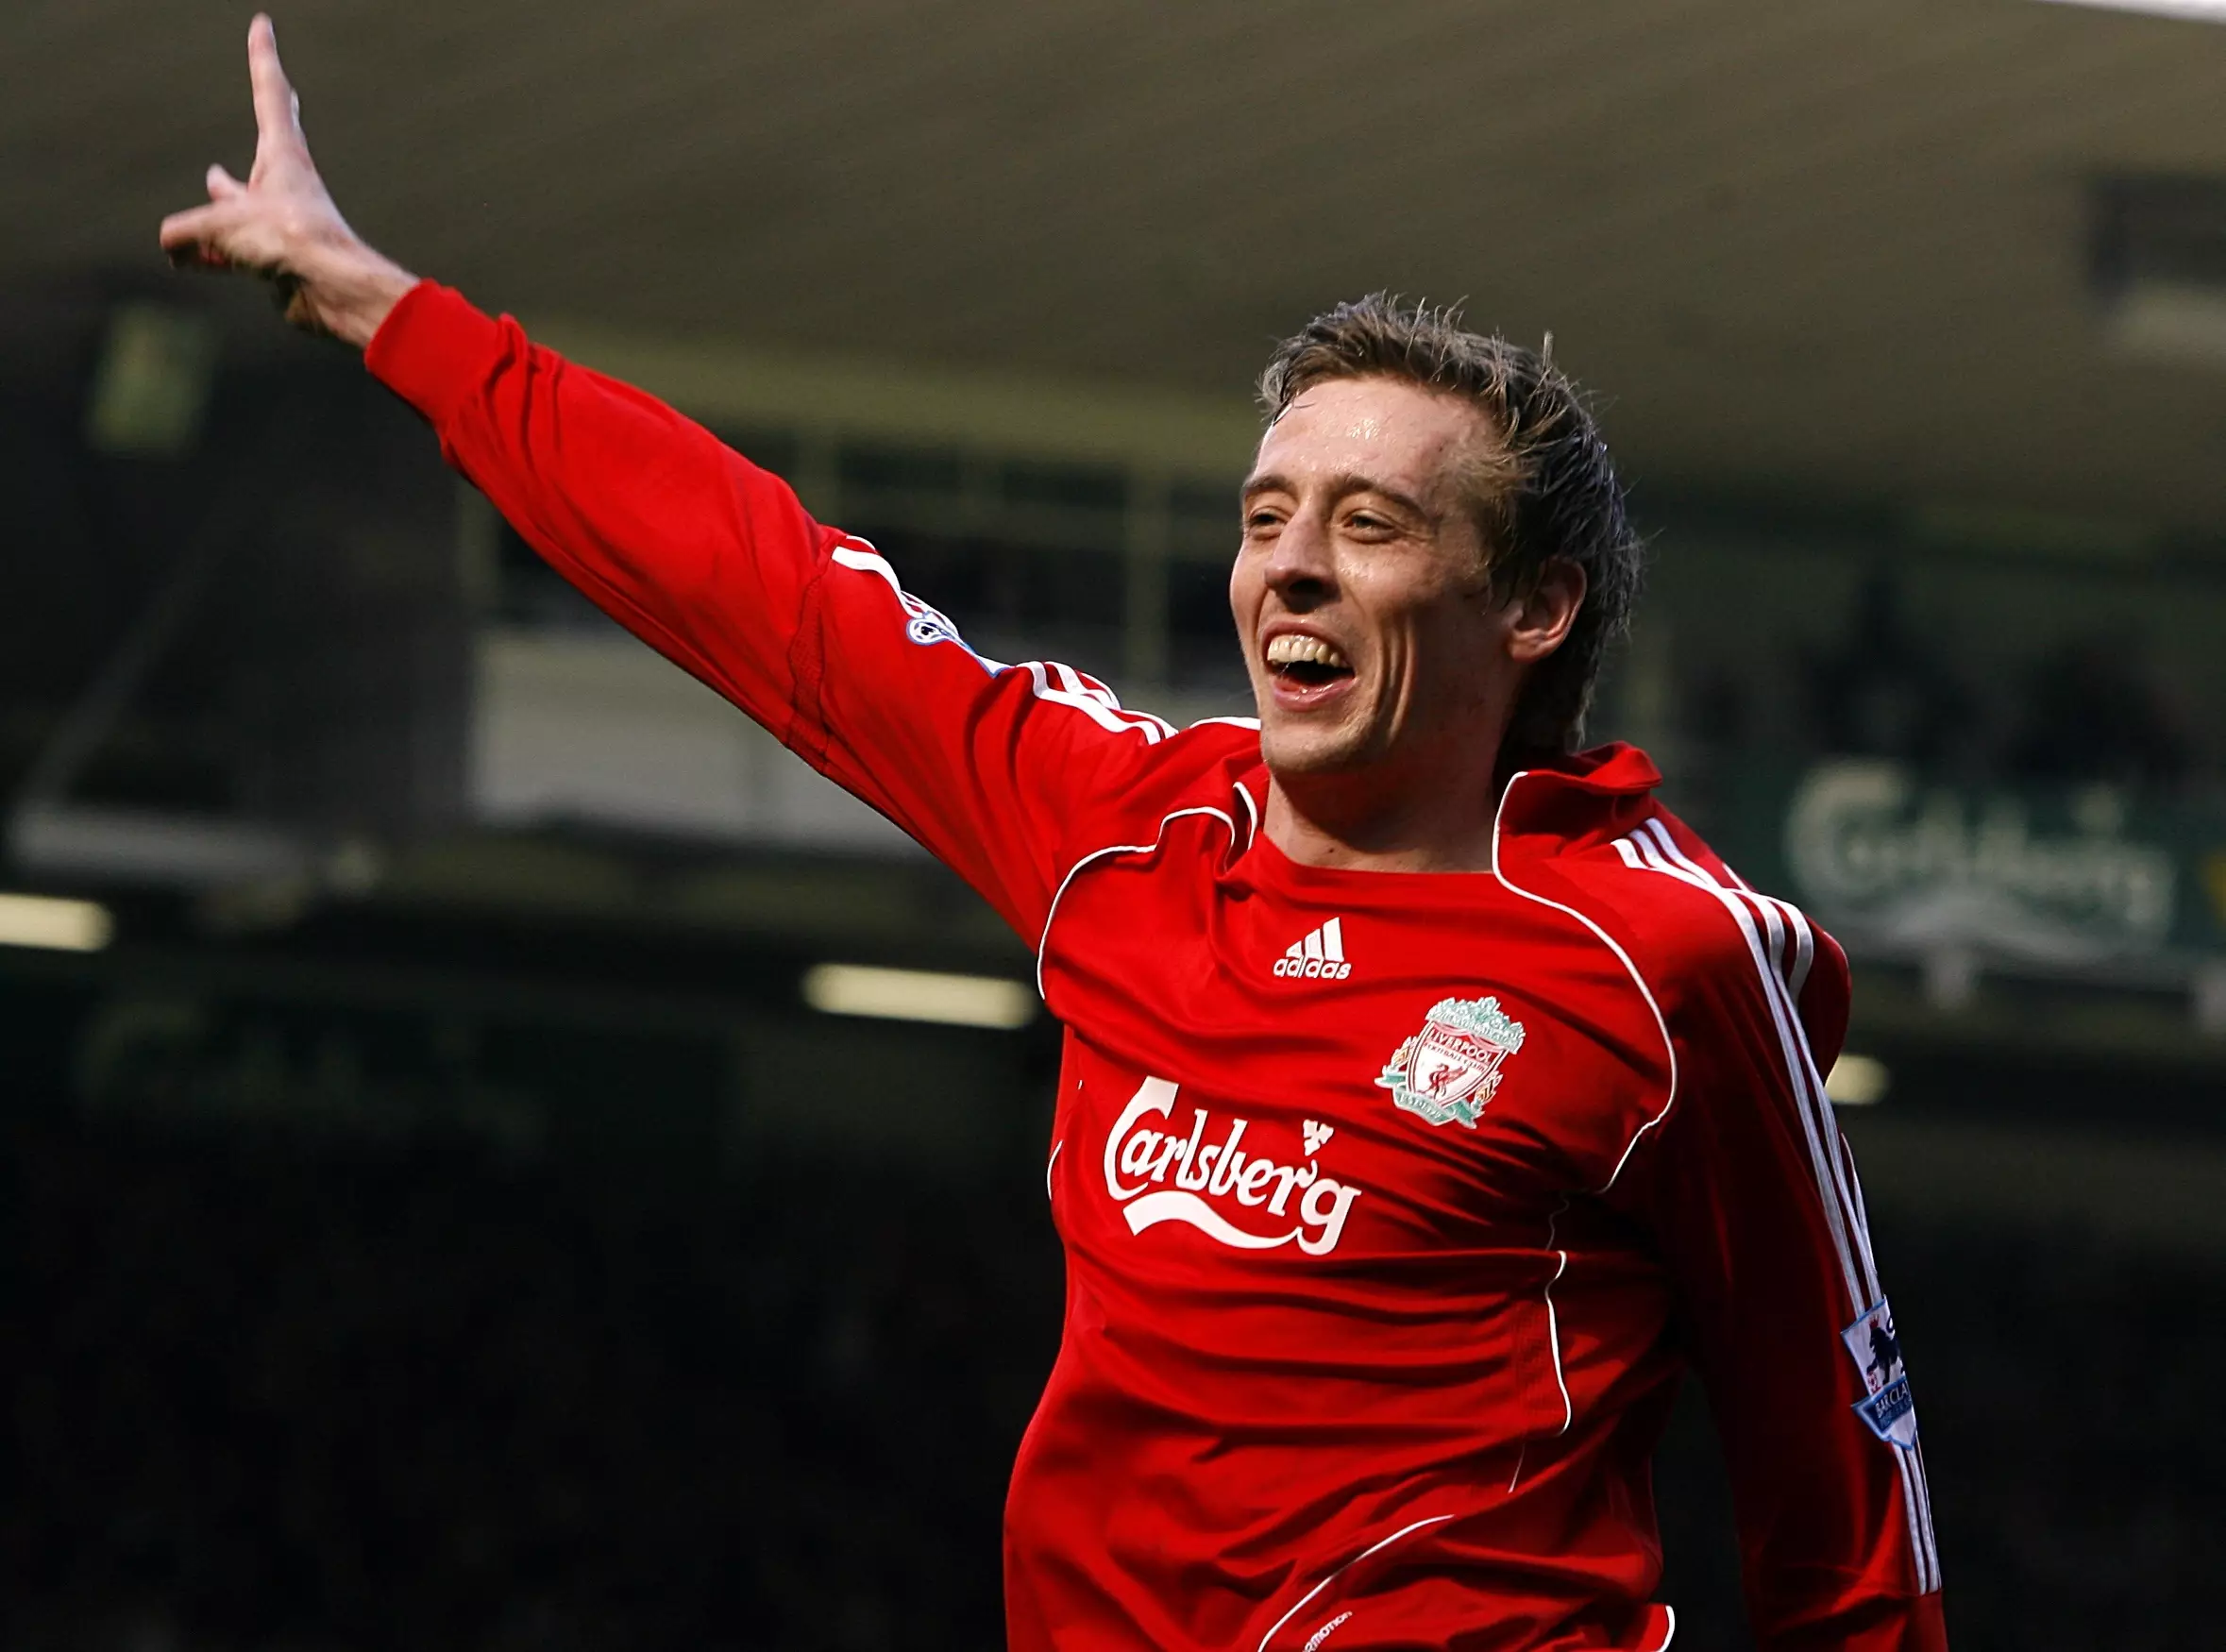 Crouch celebrates scoring for Liverpool. Image: PA Images